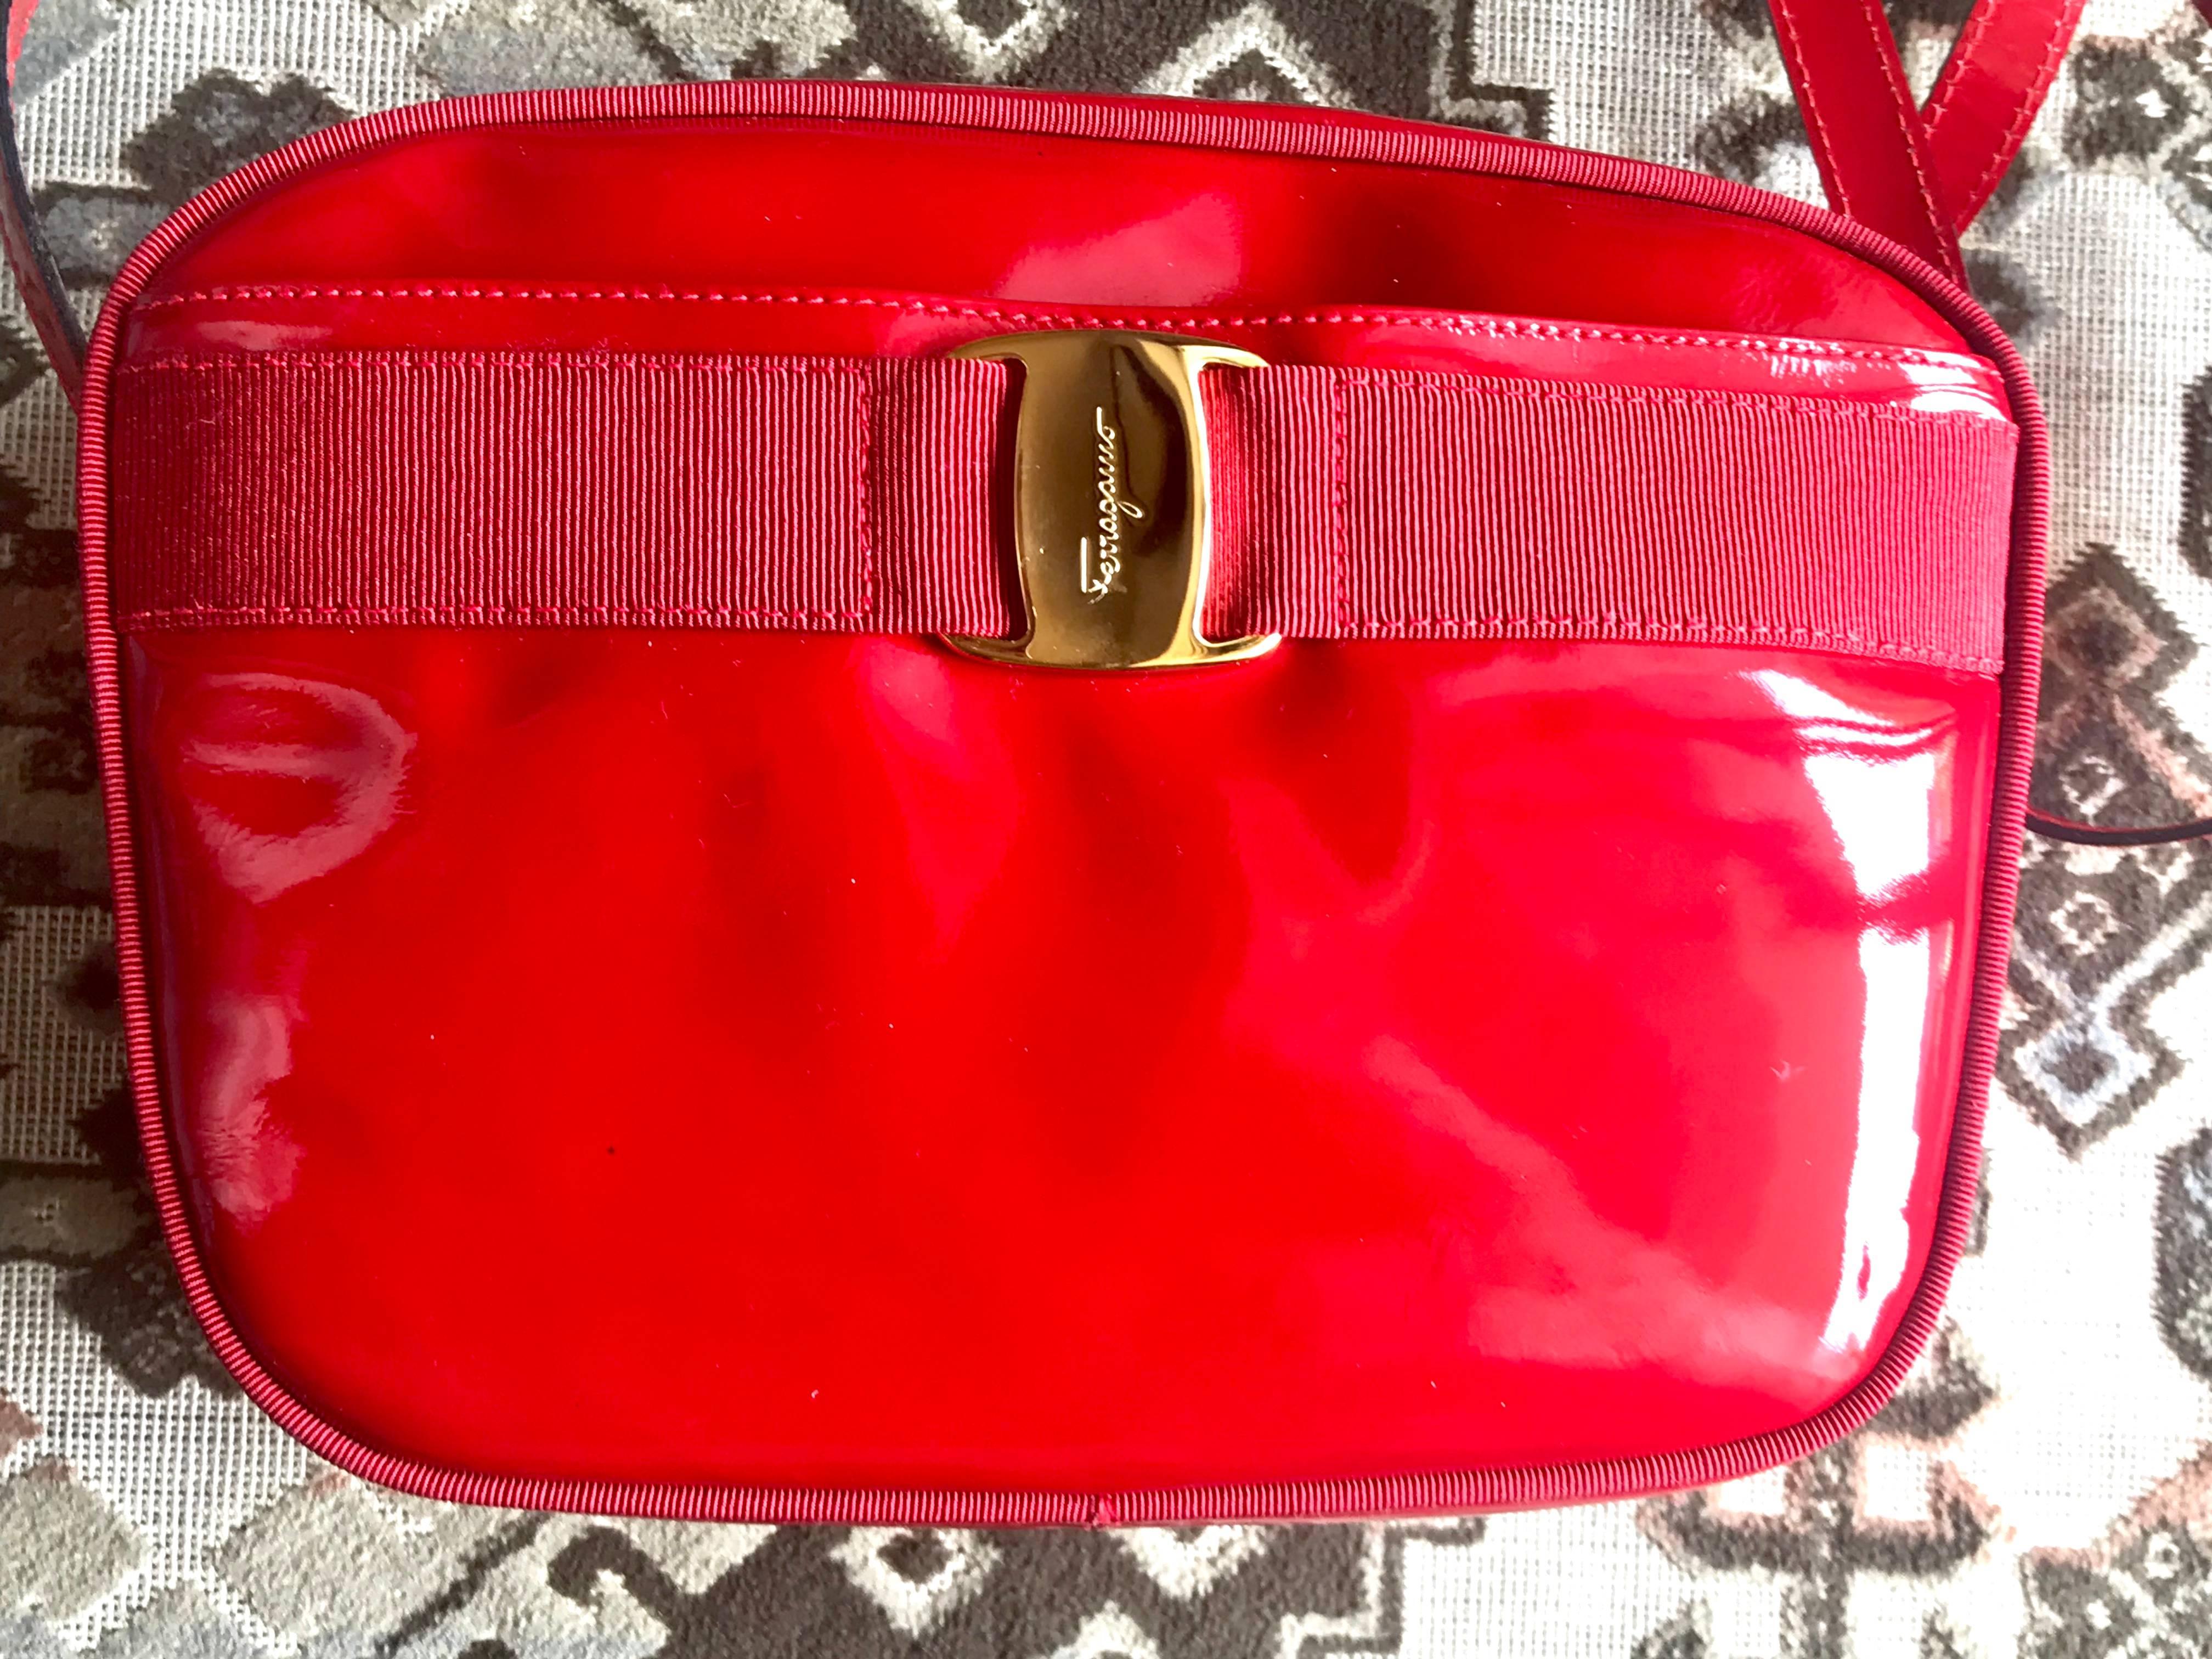 1990s. Vintage Salvatore Ferragamo vara collection patent enamel lipstick red shoulder bag with gold tone bow charm. Classic Ferragamo purse.

This is a vintage Salvatore Ferragamo Vara red patent enamel shoulder bag from the 90s. Rare color in sexy